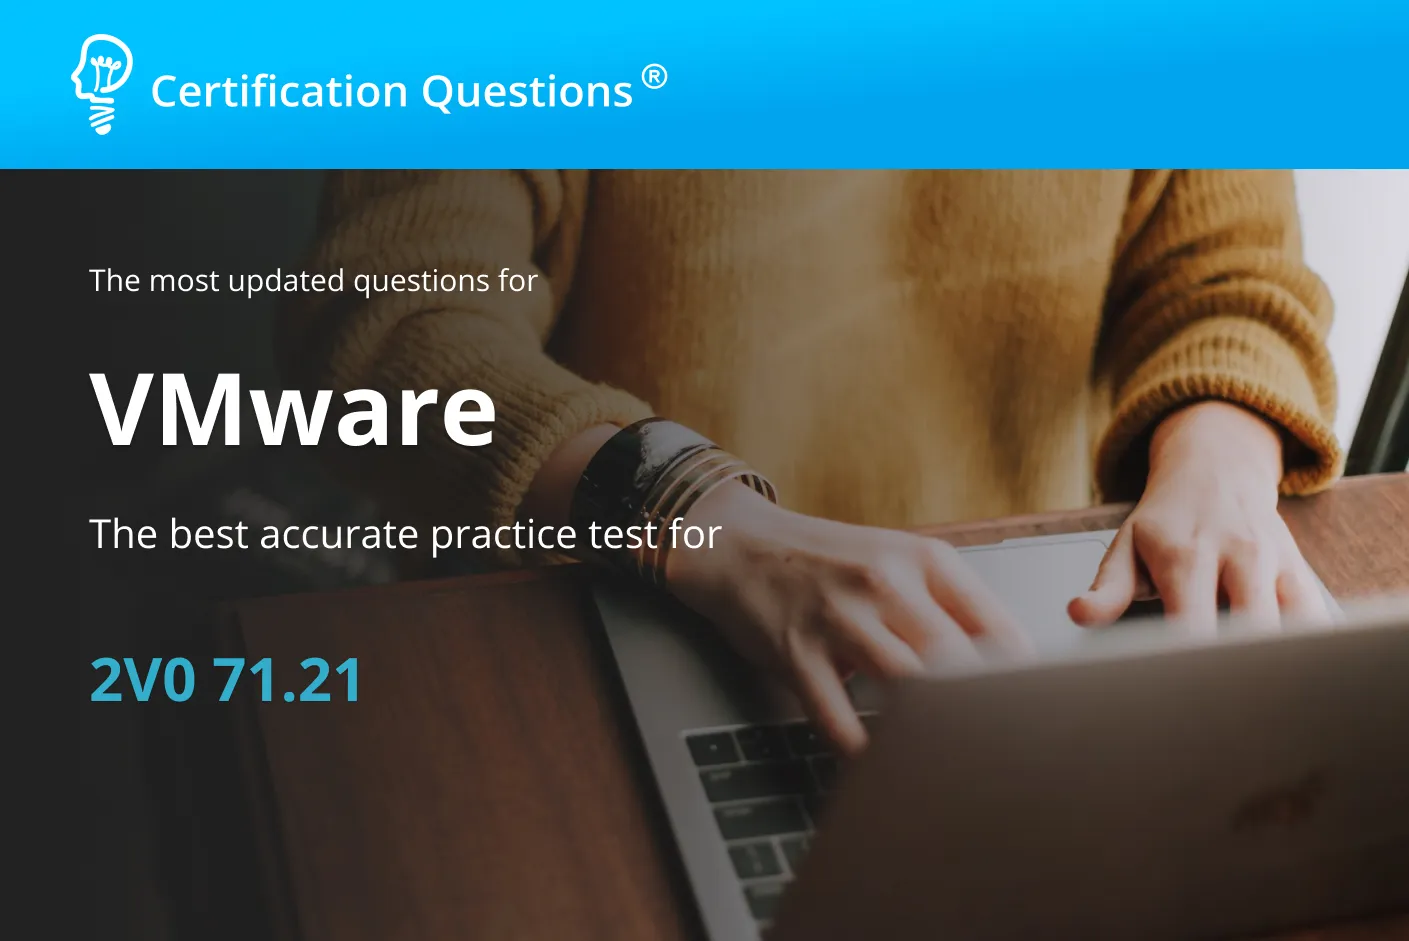 This image is related to VMware Application Modernization Practice test